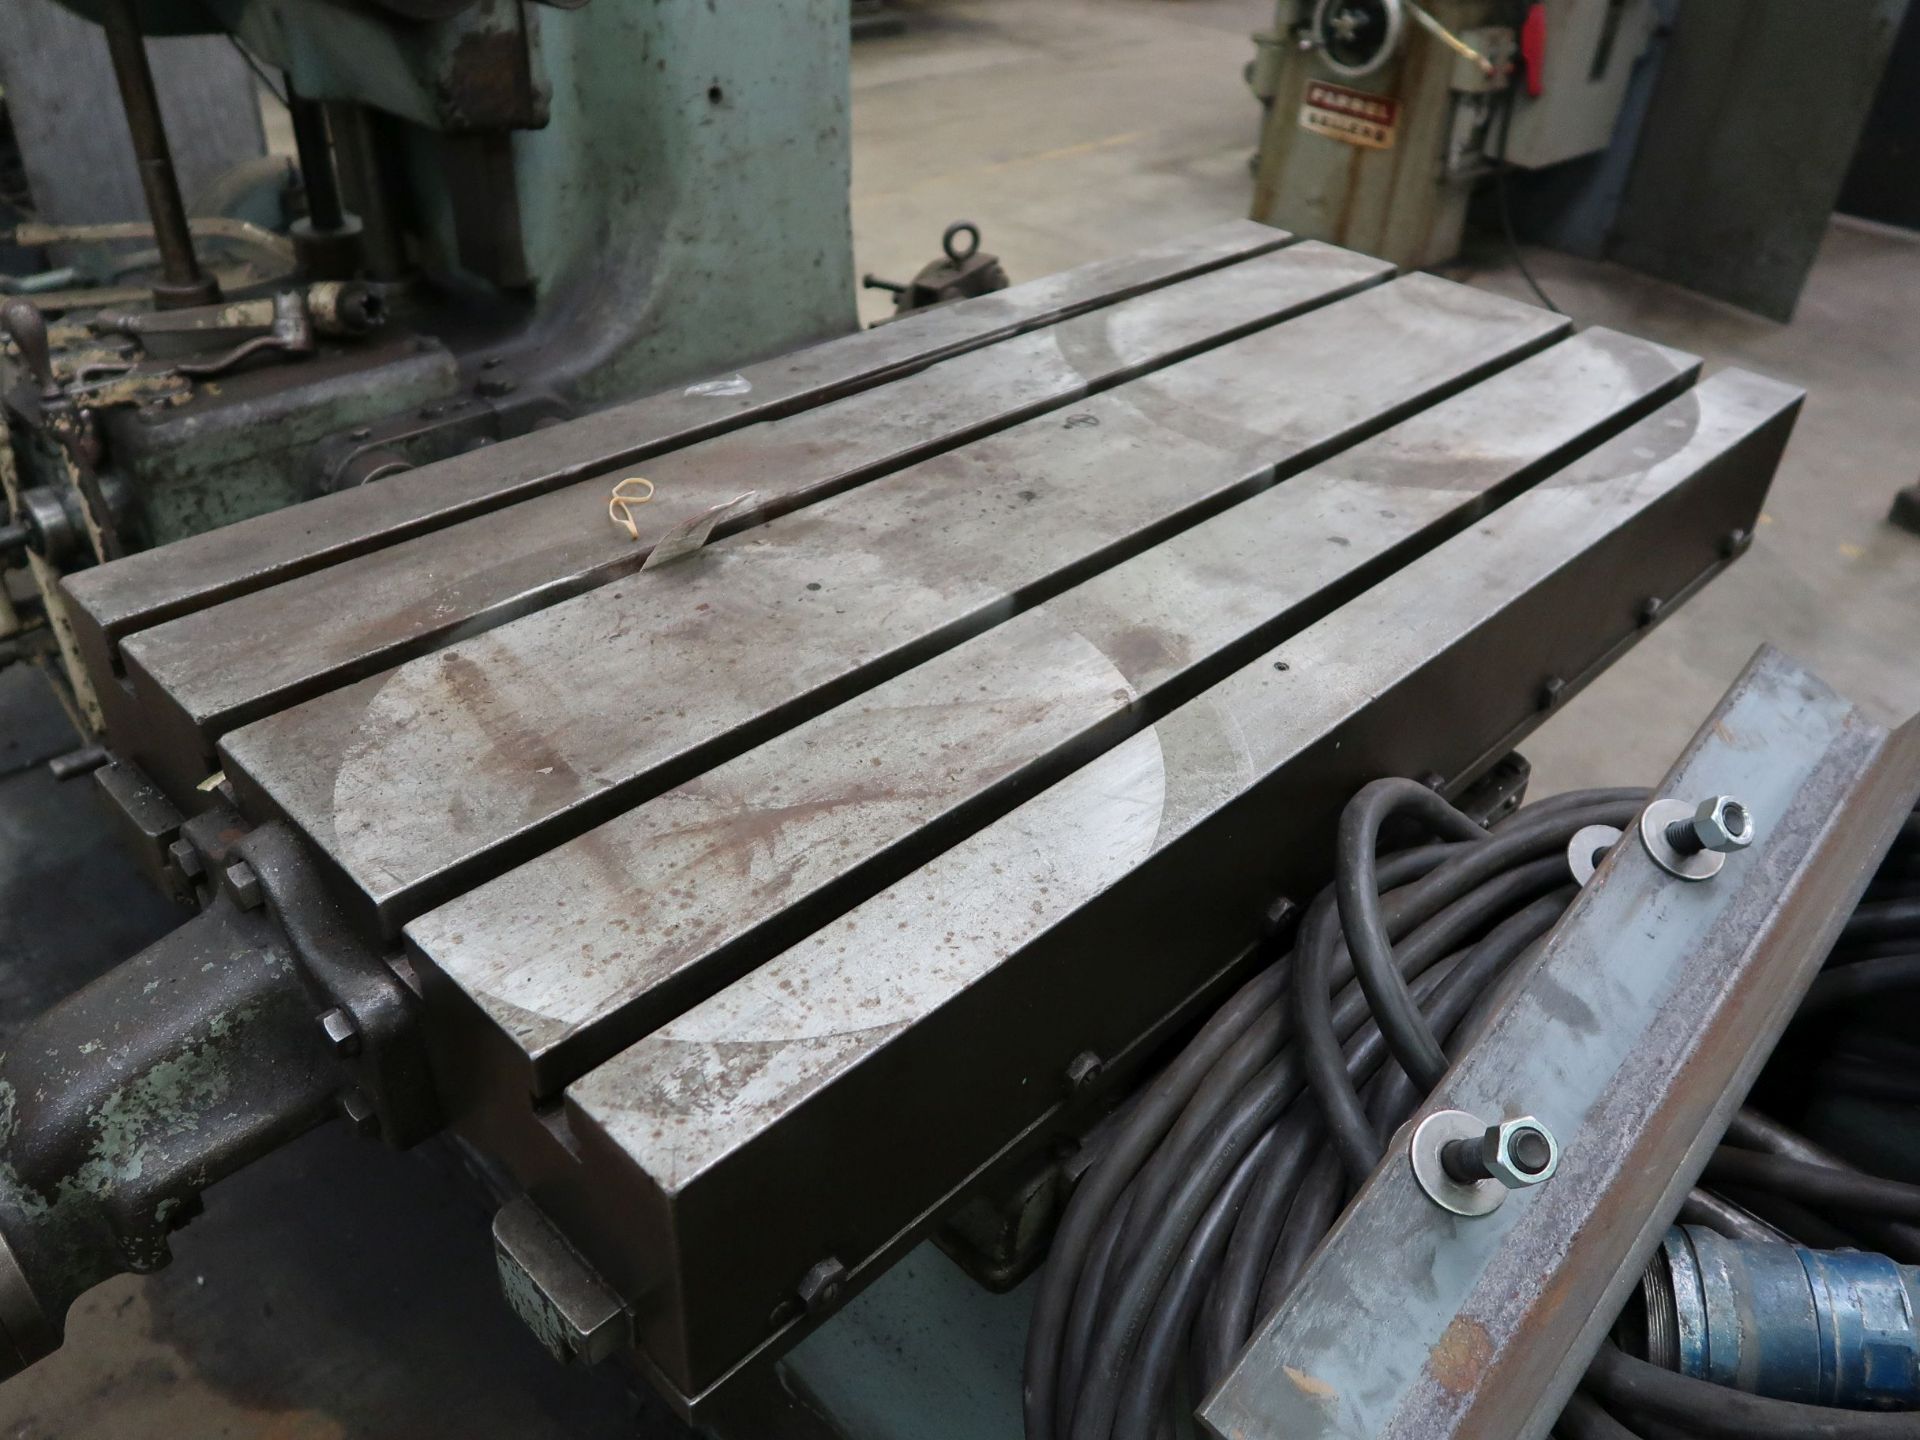 3" LUCAS NO. 31 HORIZONTAL BORING MILL, SPINDLE SPEED 15-200 RPM, 24" X 48" T-SLOTTED TABLE - Image 9 of 11